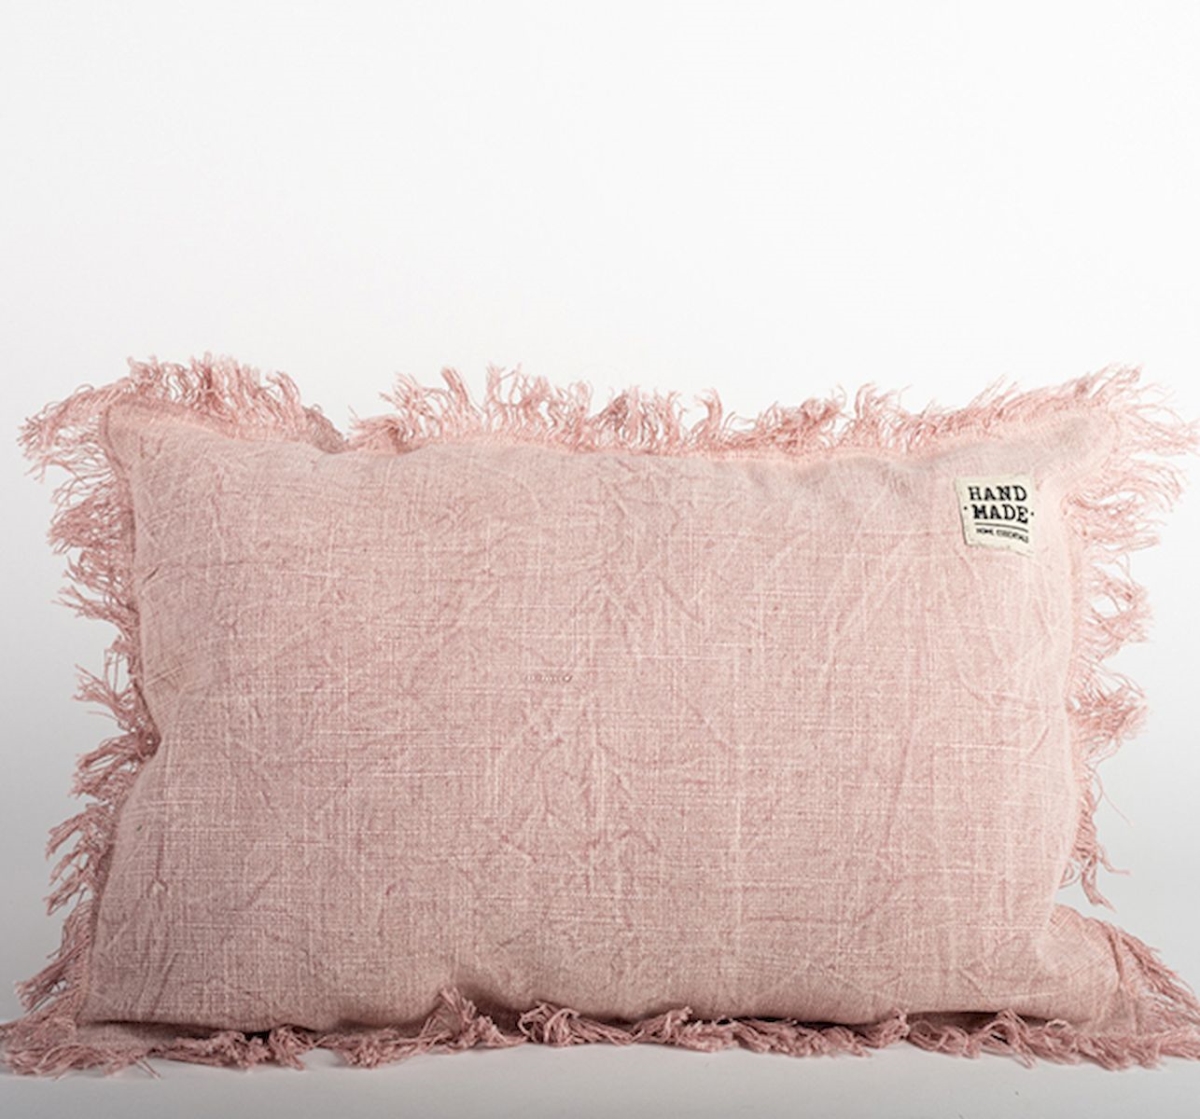 KD Marco de la cama Stone Washed Pink with Fringes Cushion Cover